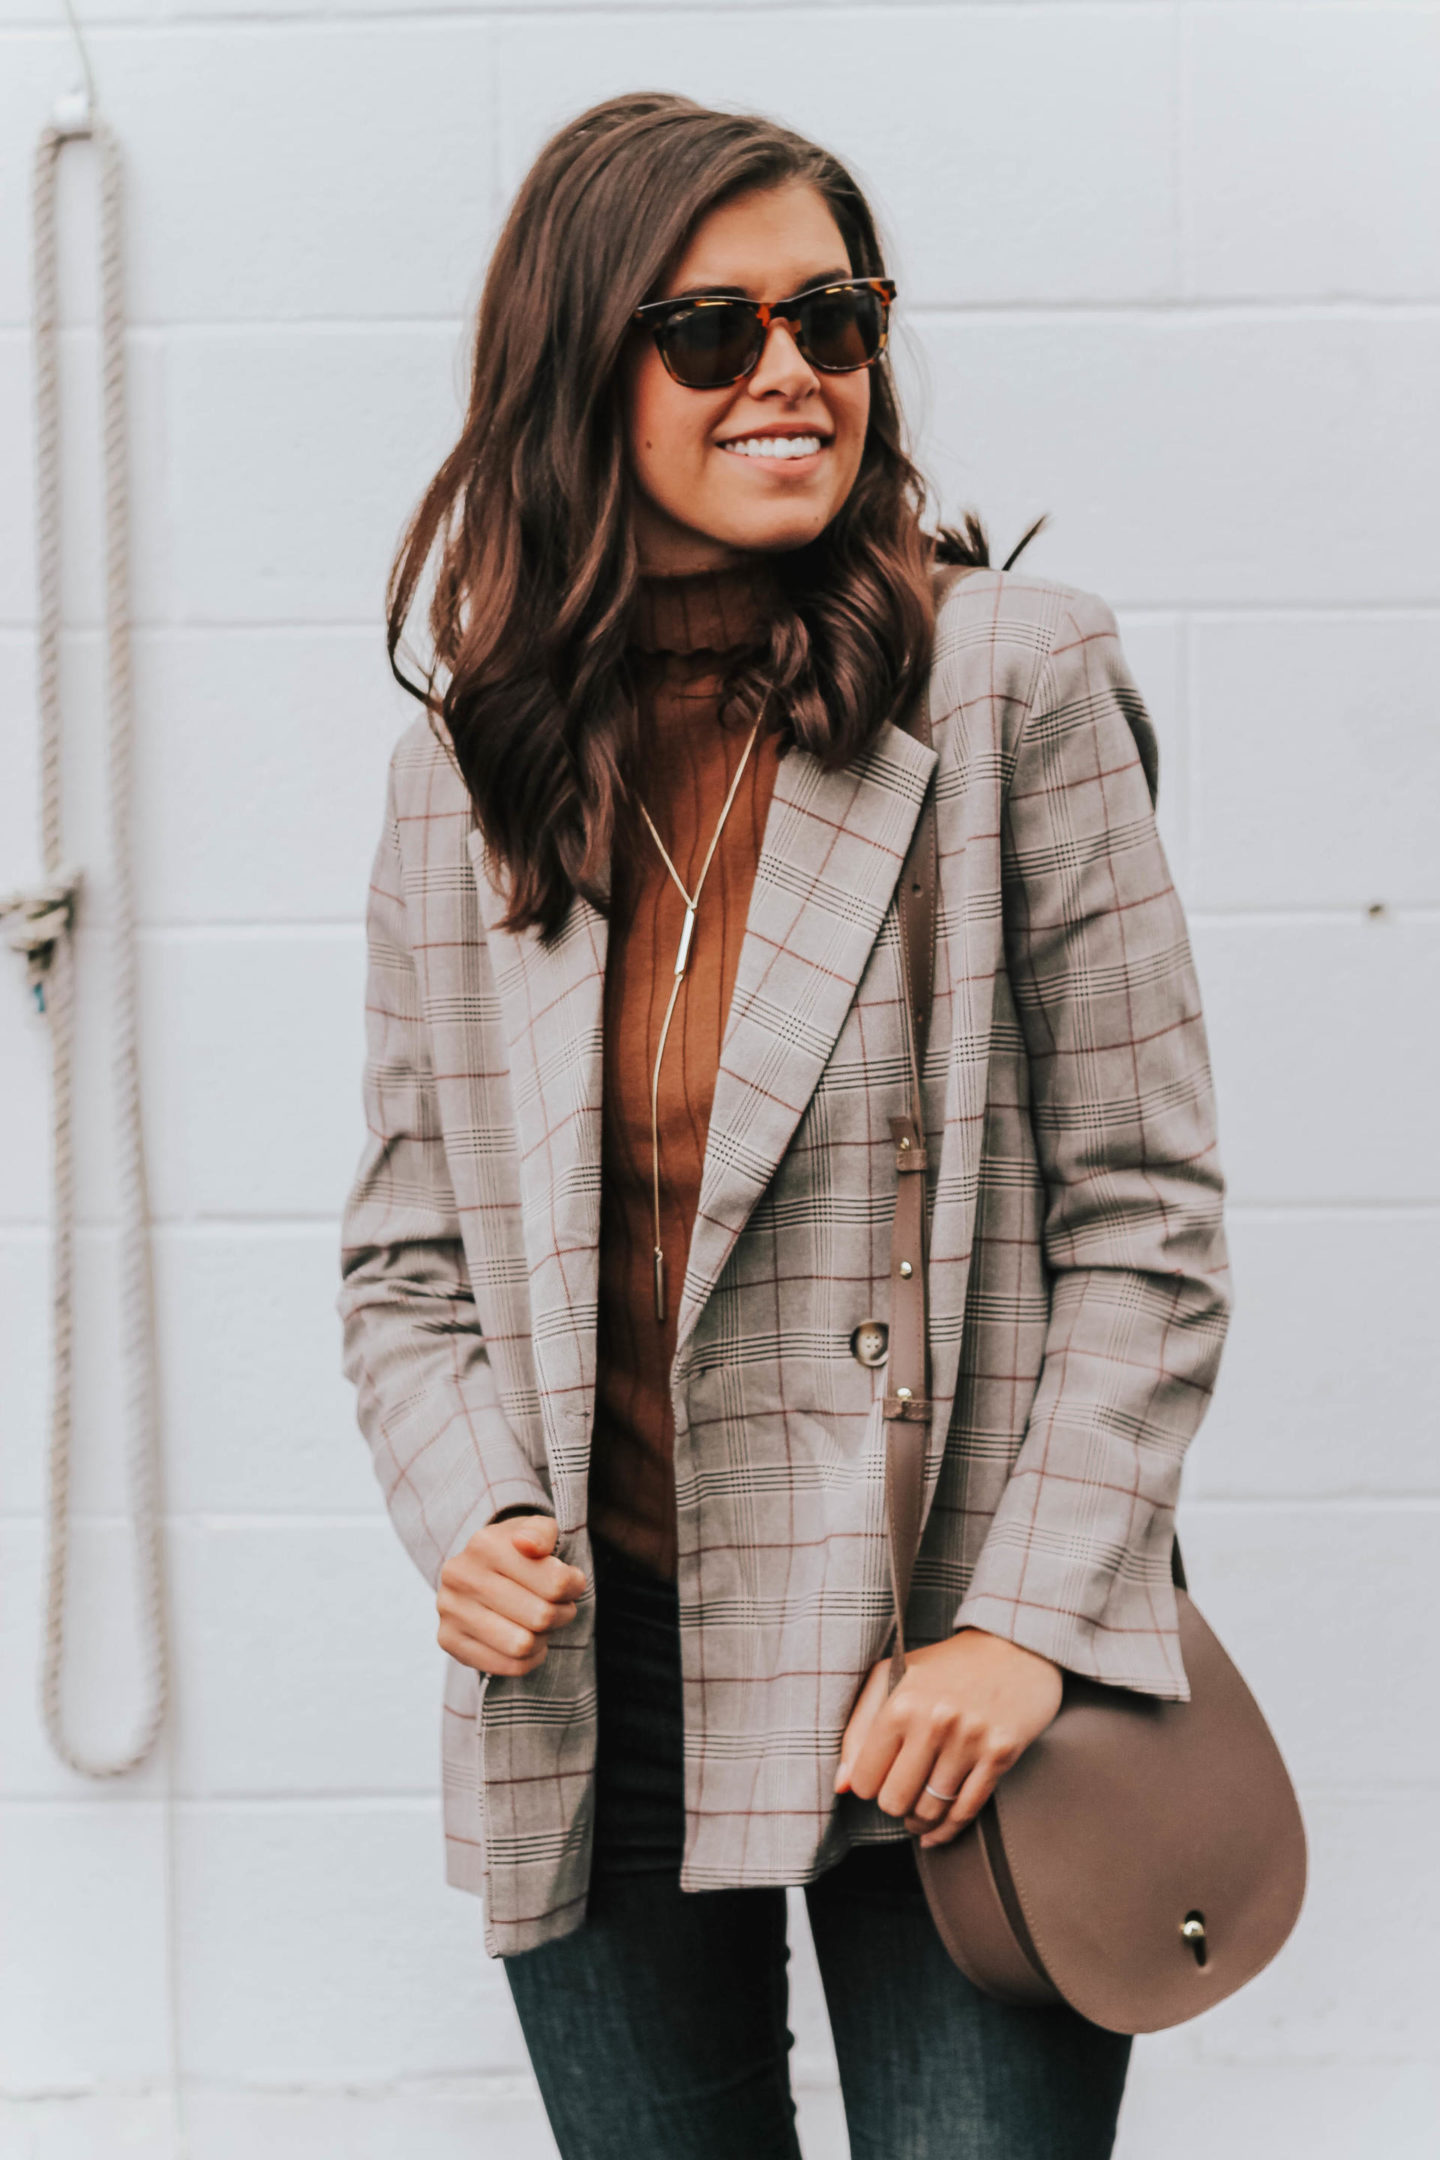 How To Style An Oversized Blazer